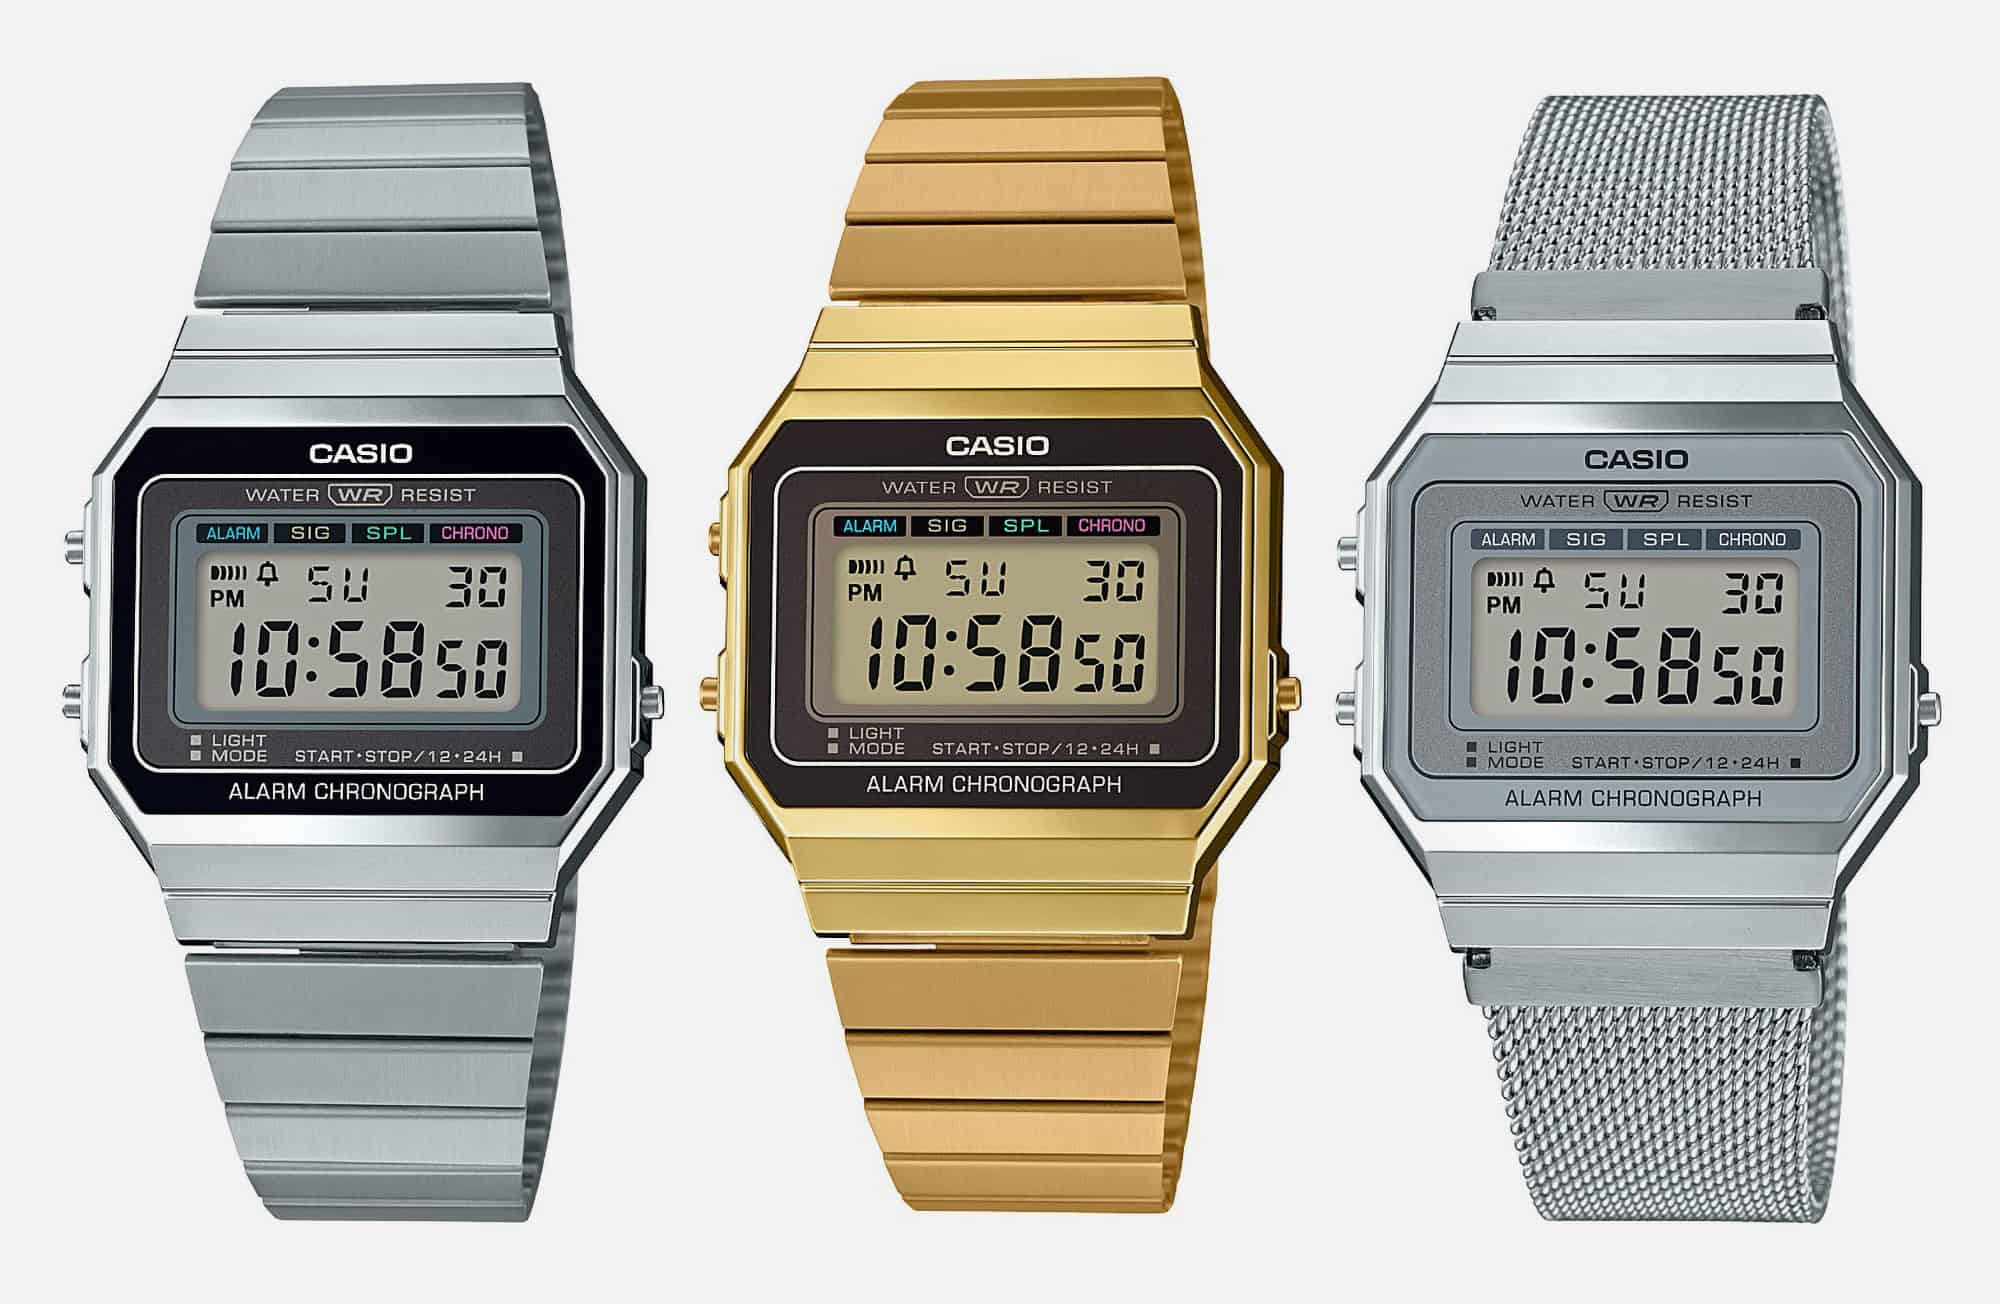 Introducing the Retro-Inspired Casio A700W Series (Refs. A700W-1A, A700WM-7AVT, and A700WMG-9AVT)